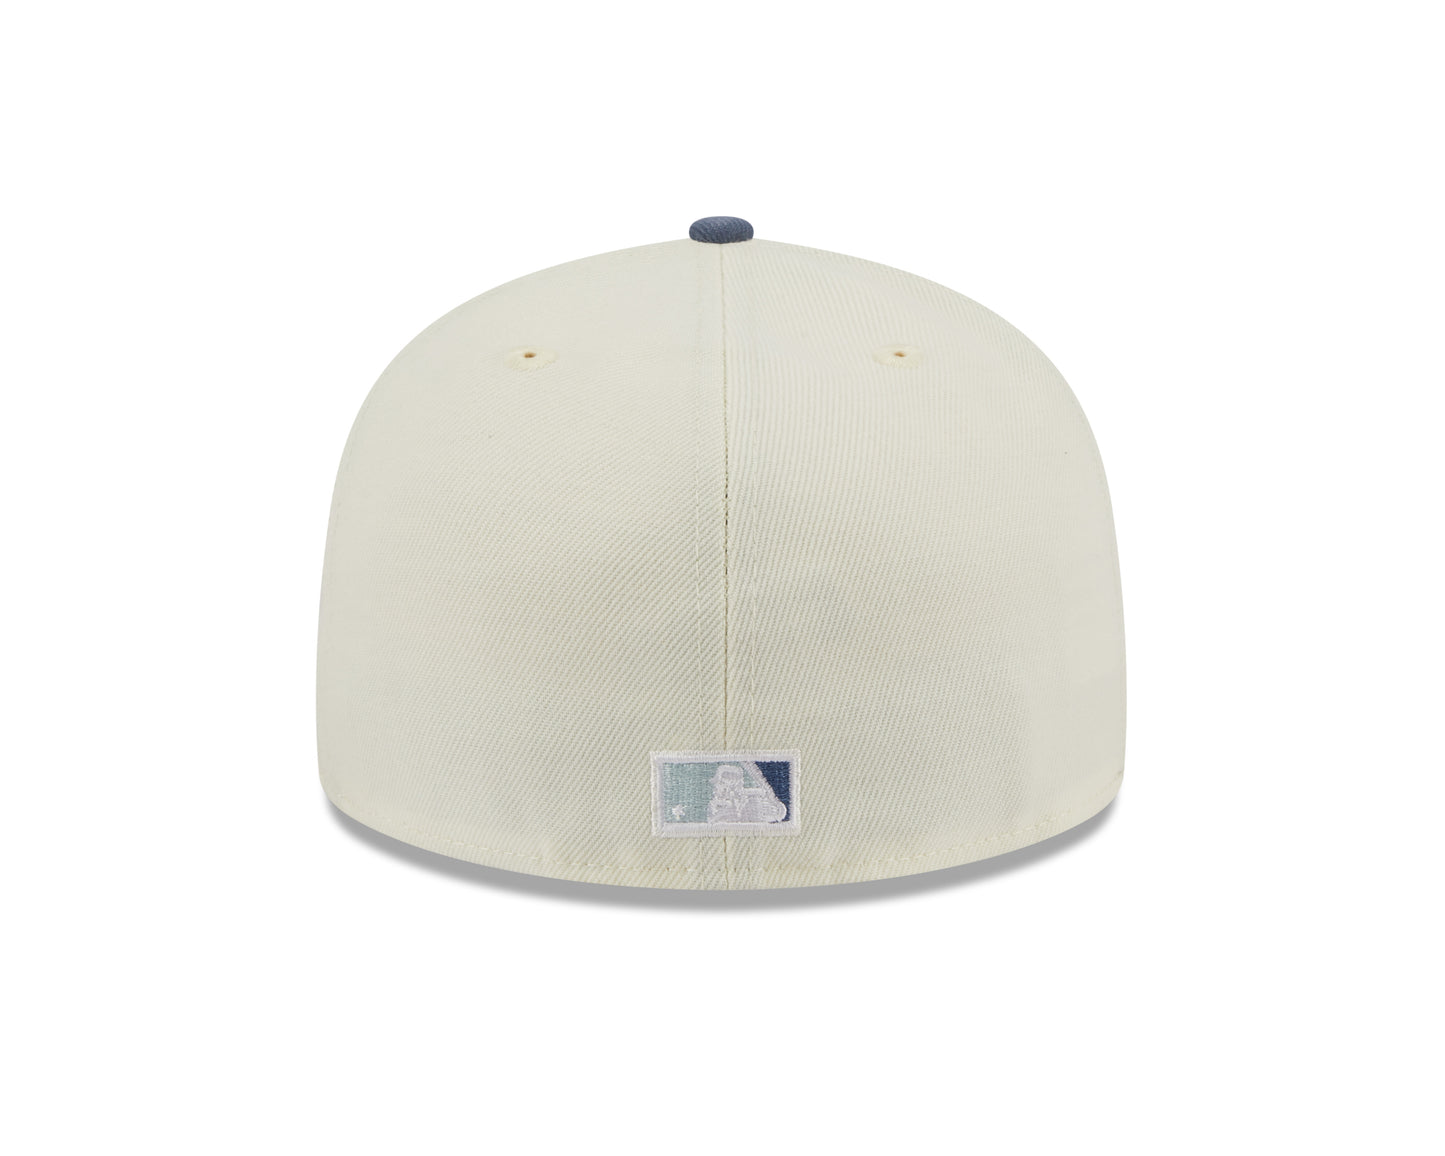 New Era 59fifty Fitted Cap Anaheim Angels Cooperstown THE ELEMENTS - Chrome White/Blue - Headz Up 